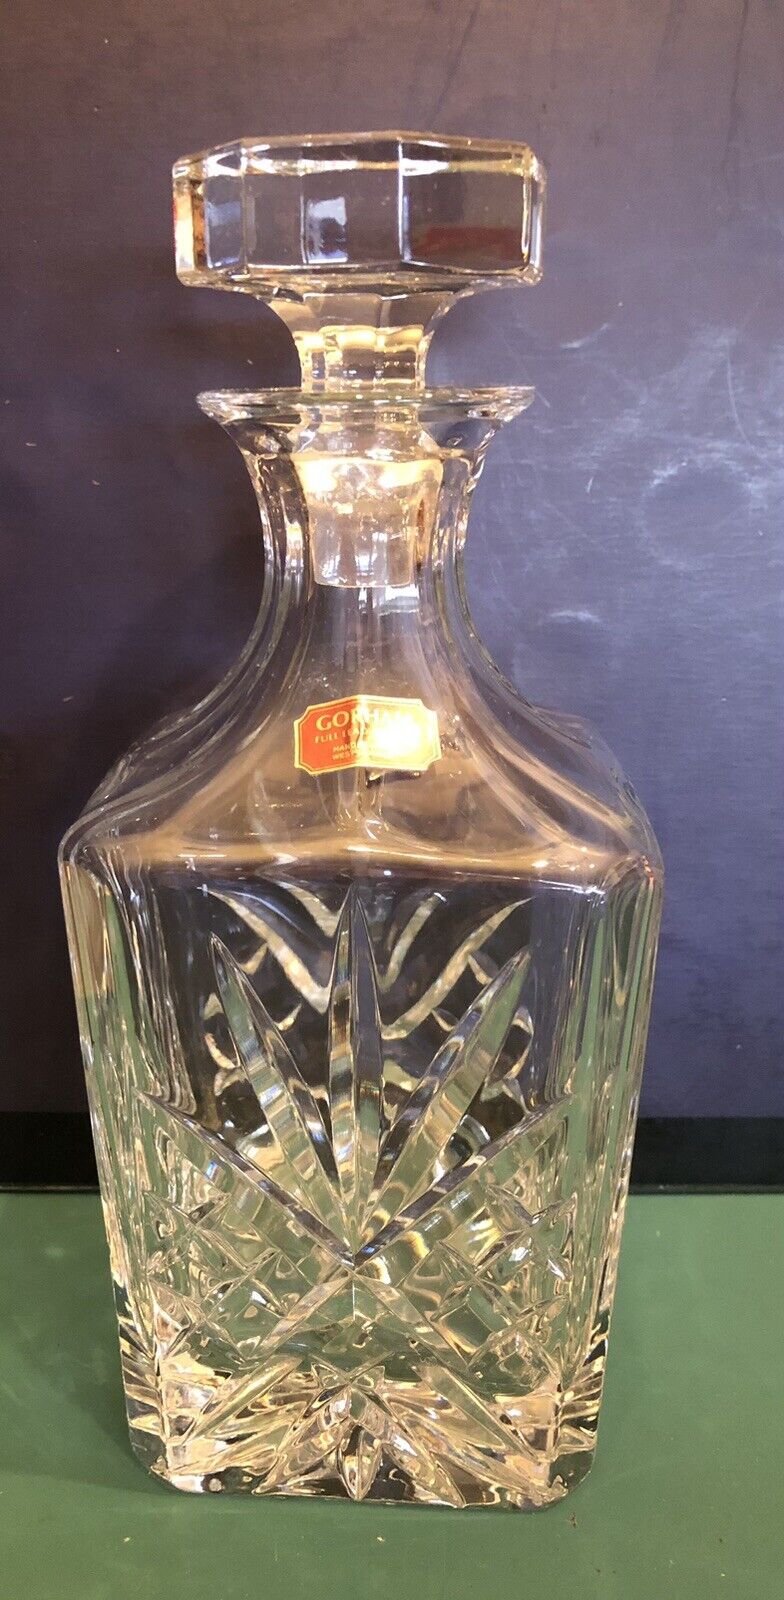 Vintage GORHAM Full Lead Crystal 9.75” Decanter Handcrafted In Germany